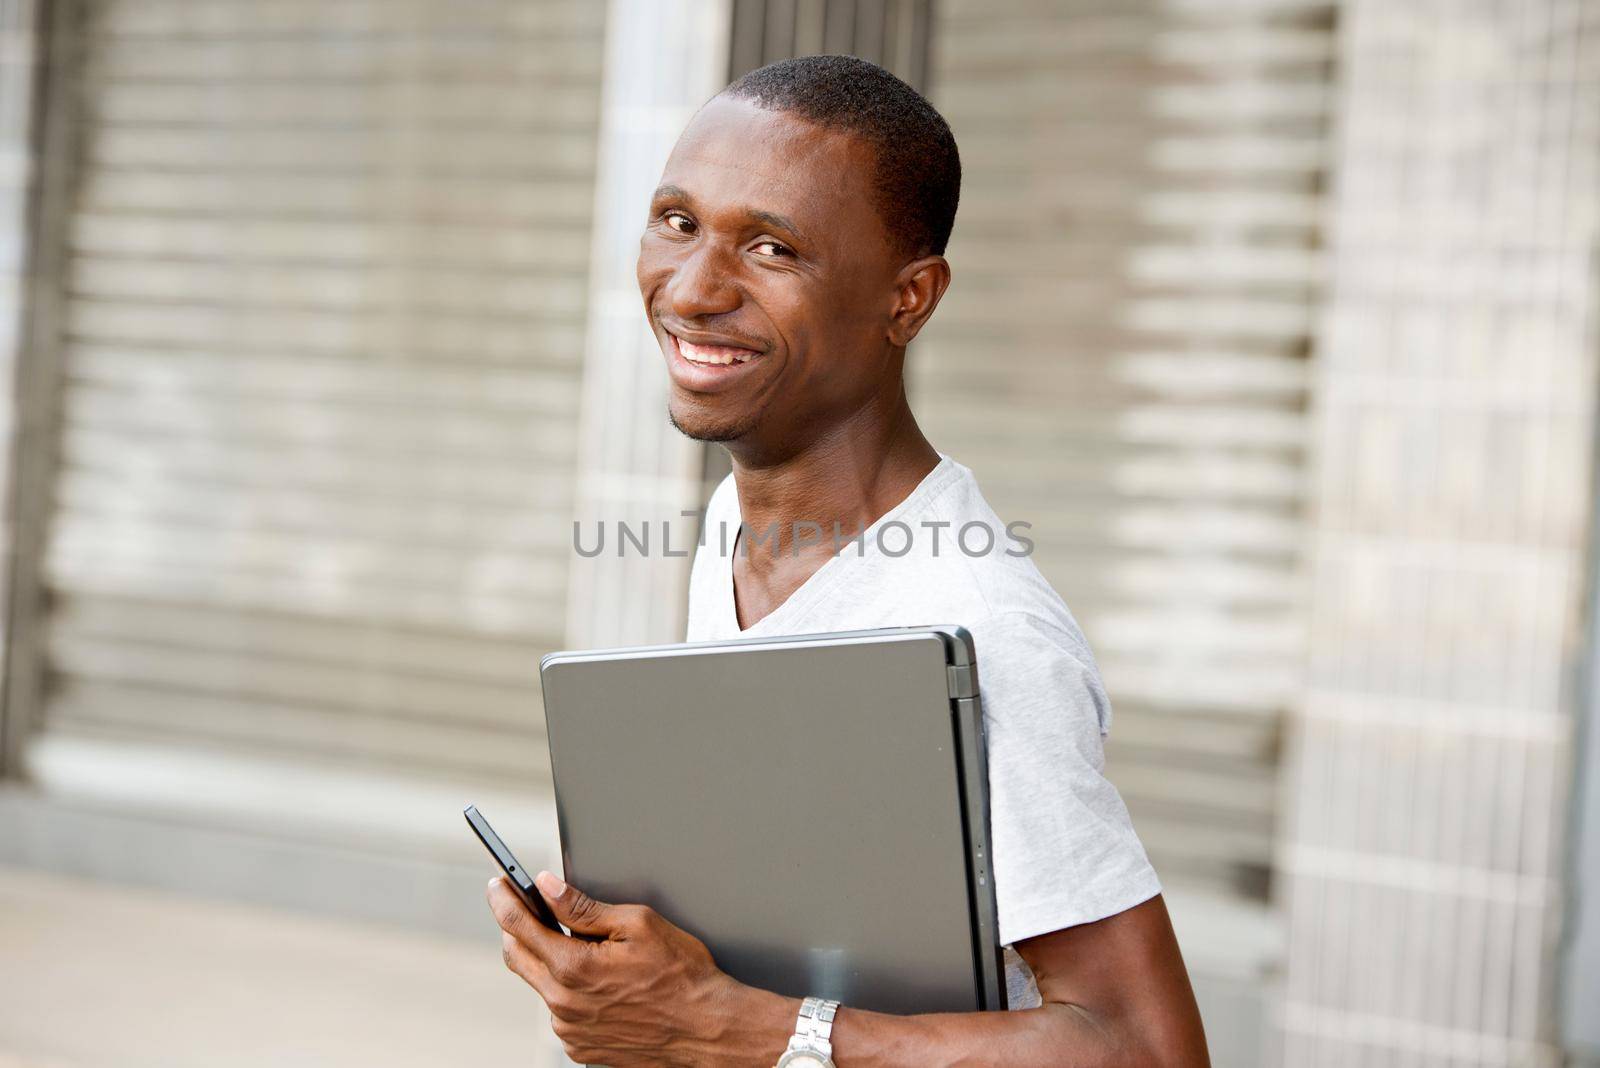 Young student standing in front of study room with laptop and looking at the camera smiling.